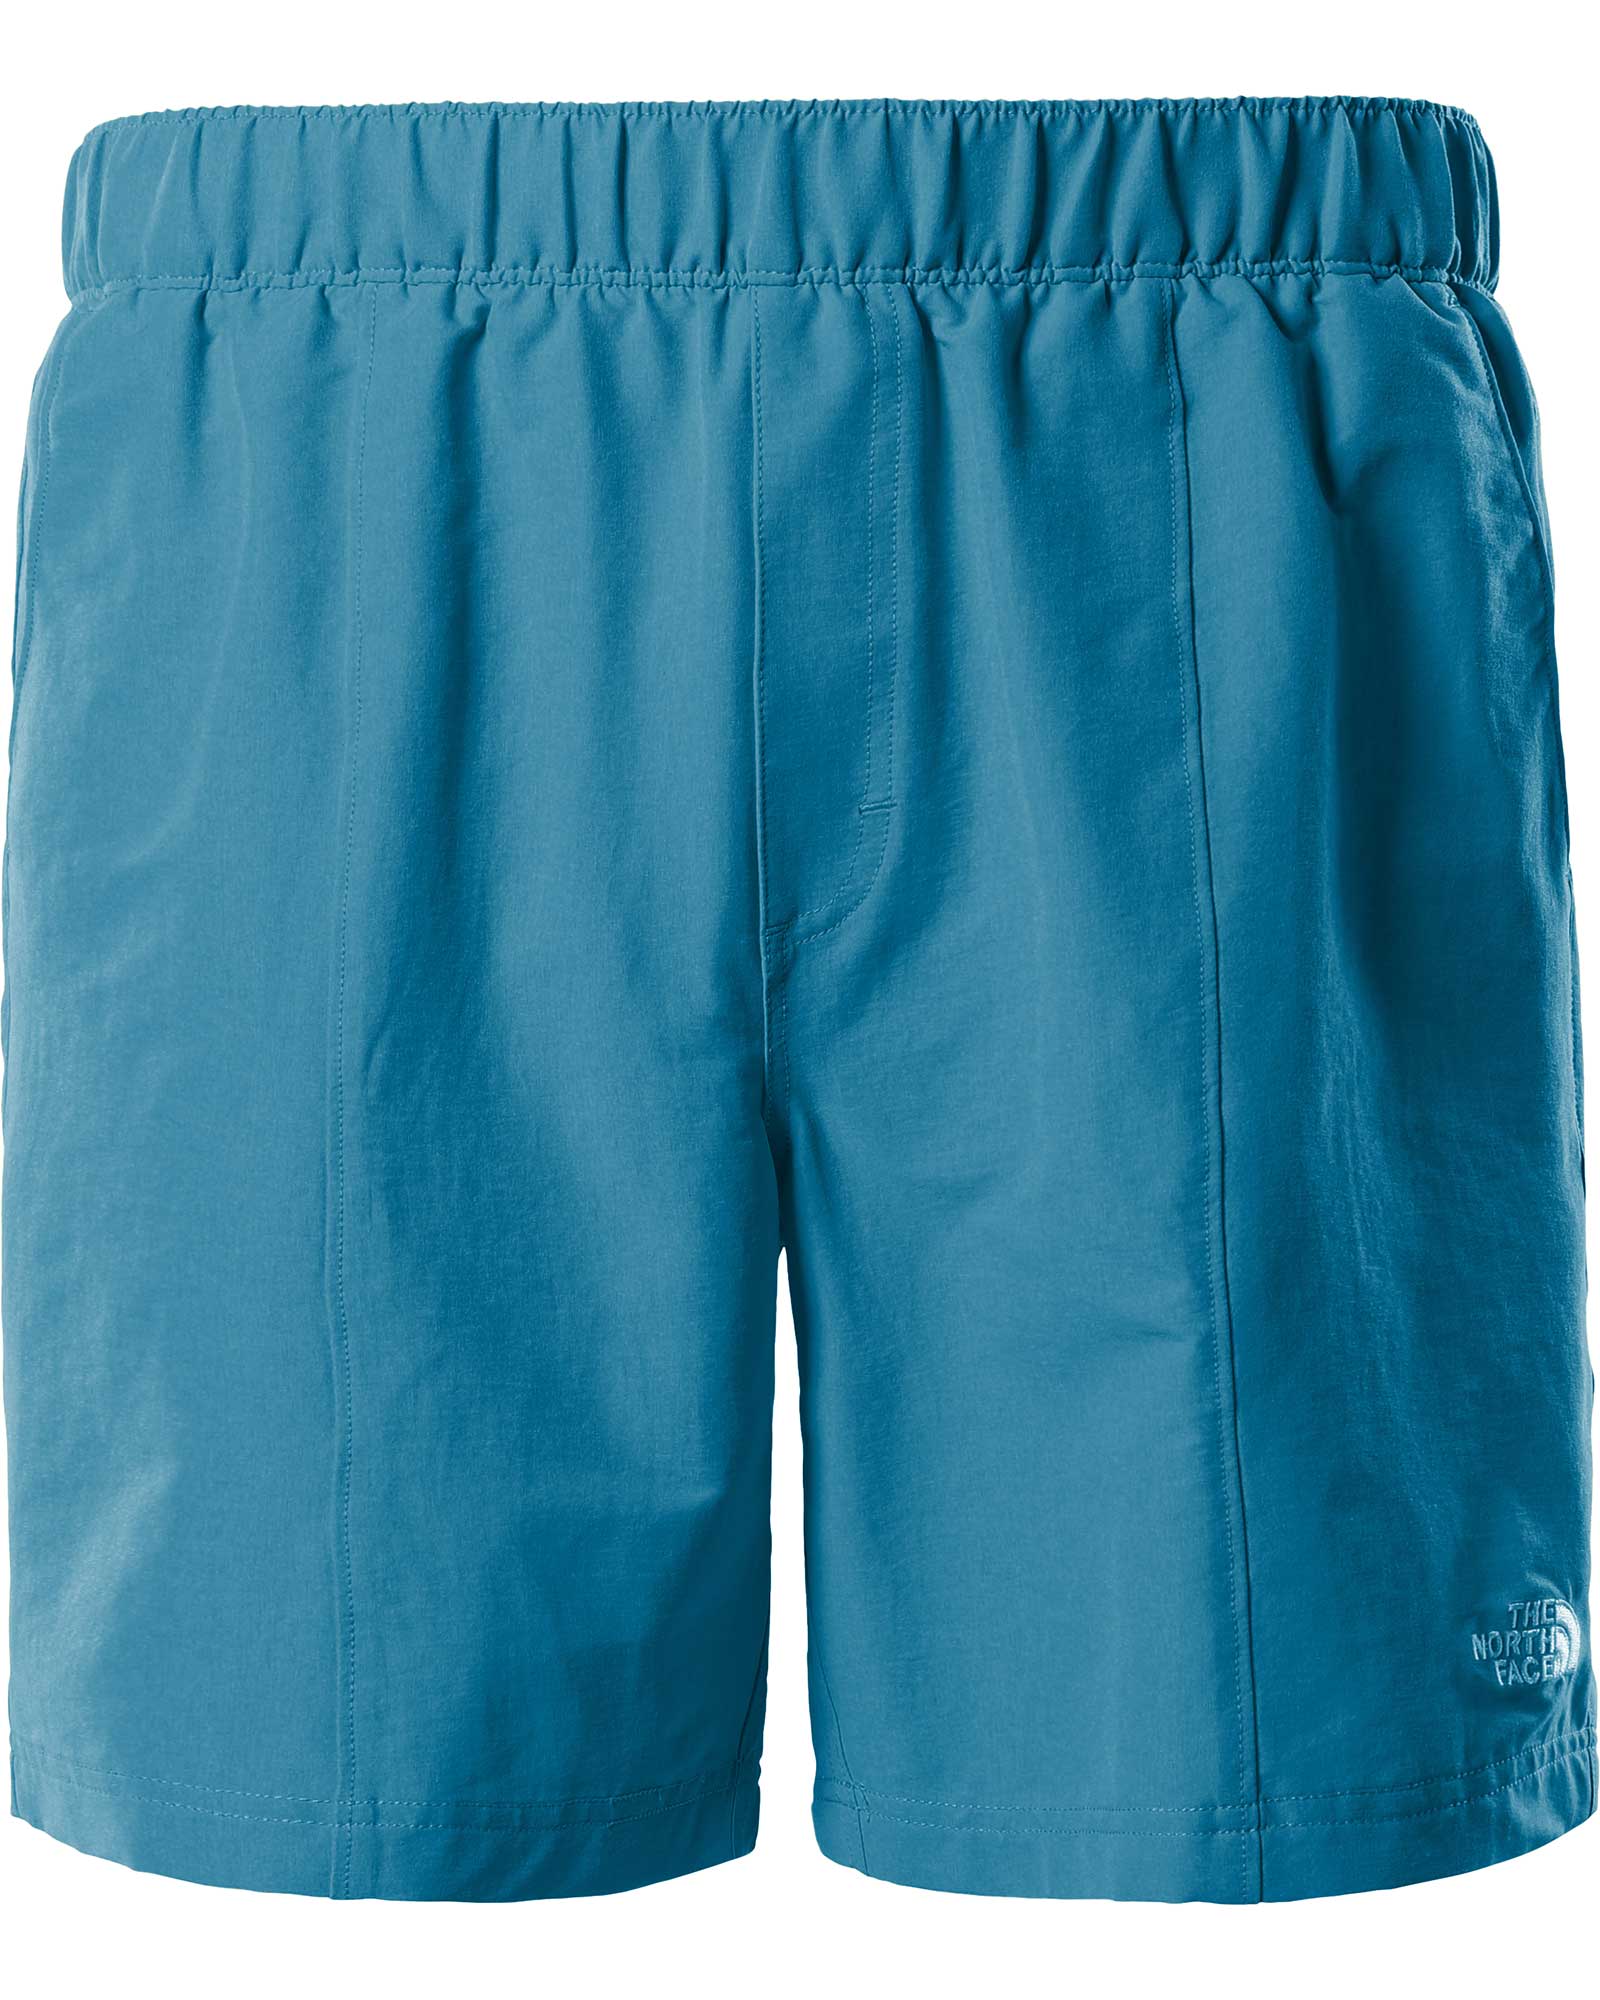 The North Face Class V Pull On Men’s Shorts - Banff Blue S